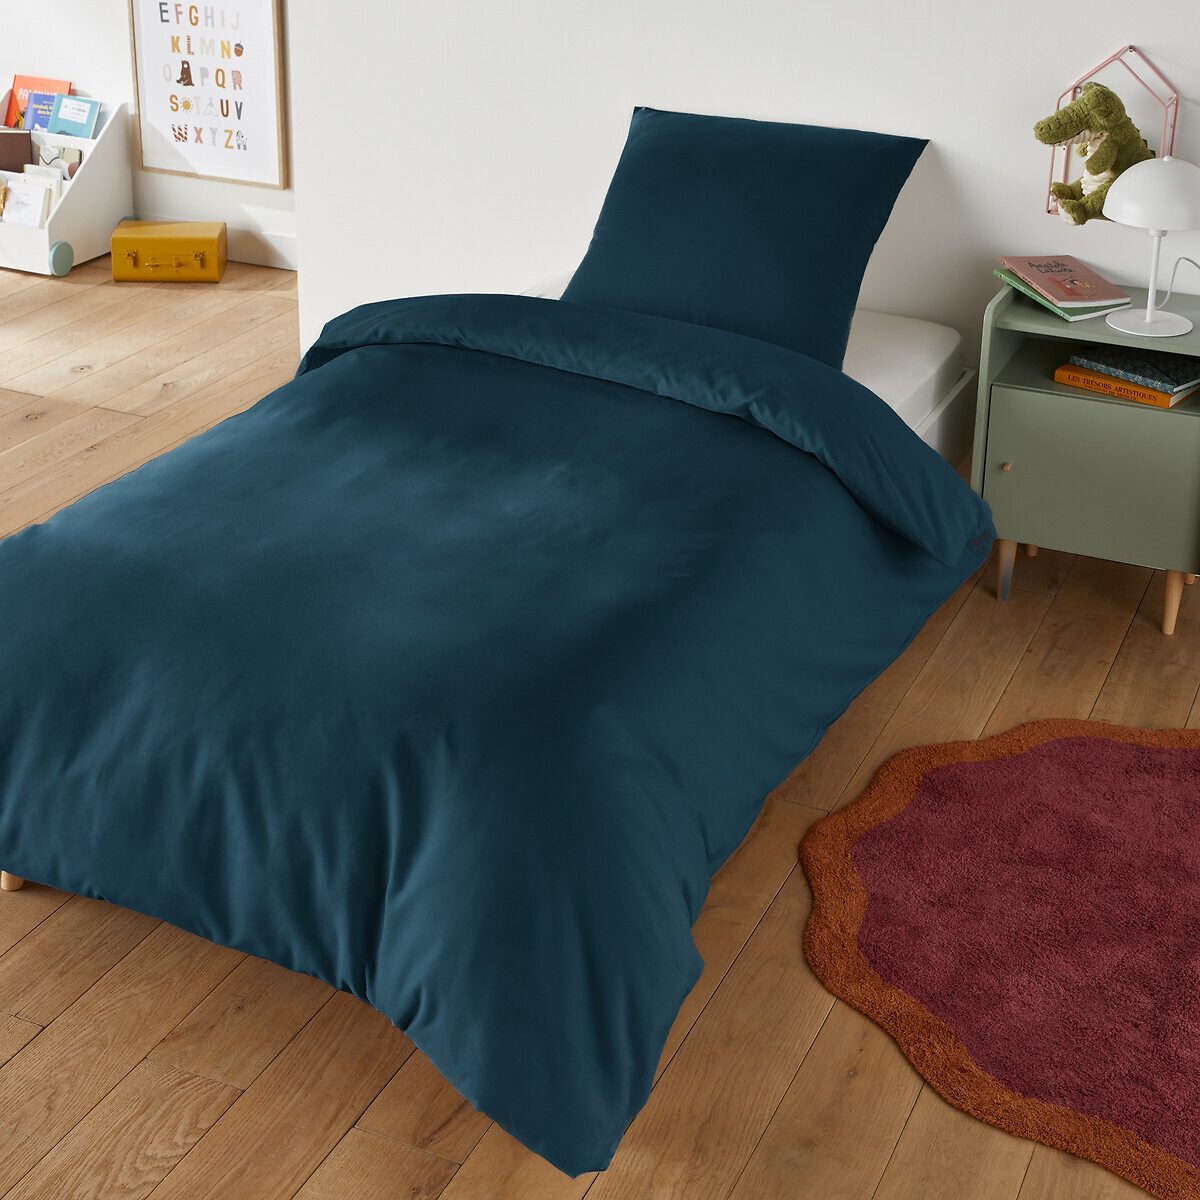 Child's 100% Cotton Bed Set with Square Pillowcase - image 1